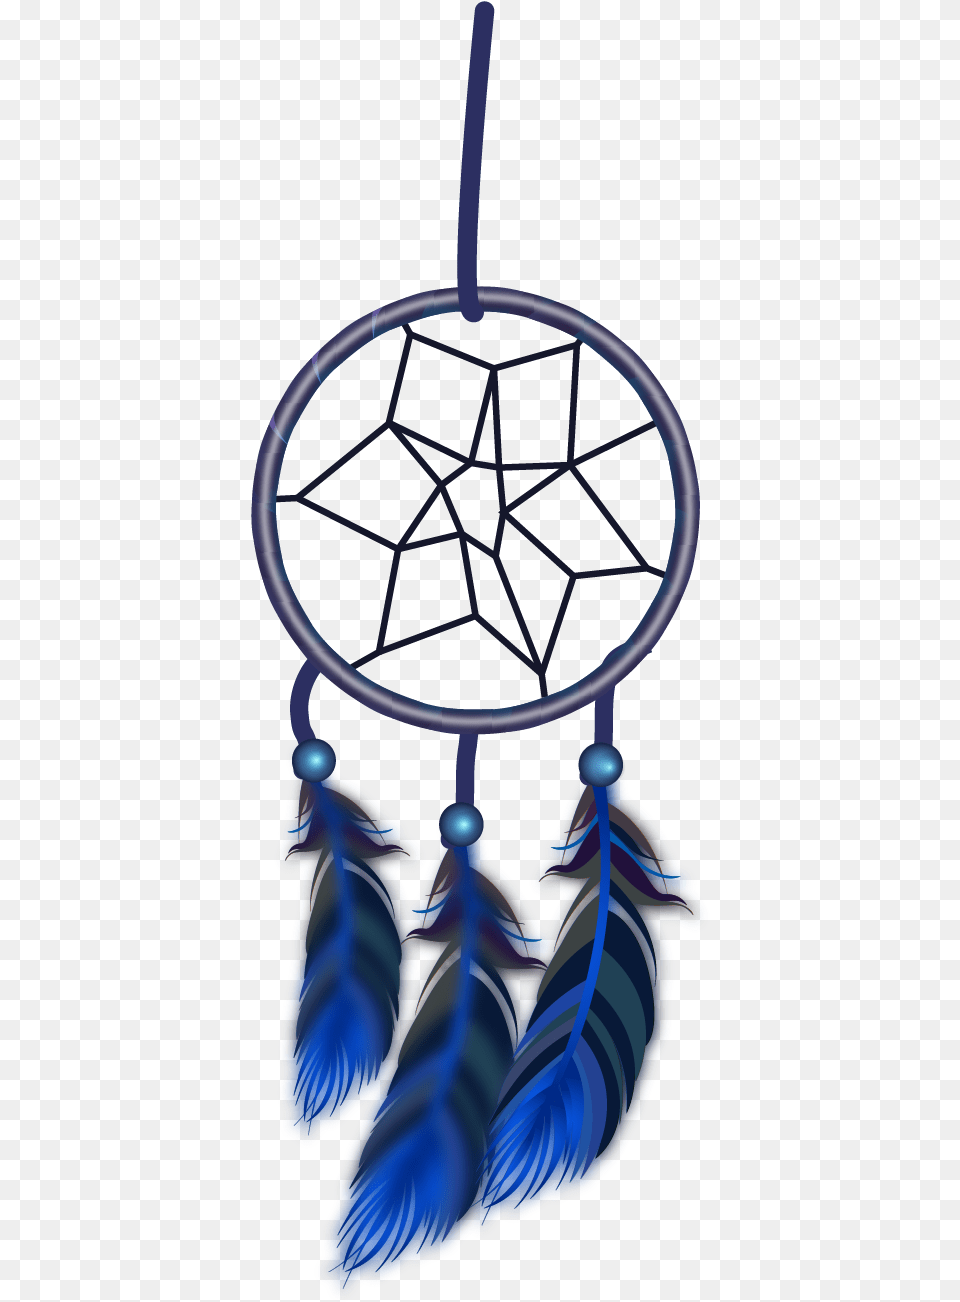 Dreamcatcher Feather Wind Chimes Dream Catcher Feather, Accessories, Hoop, Plant Png Image